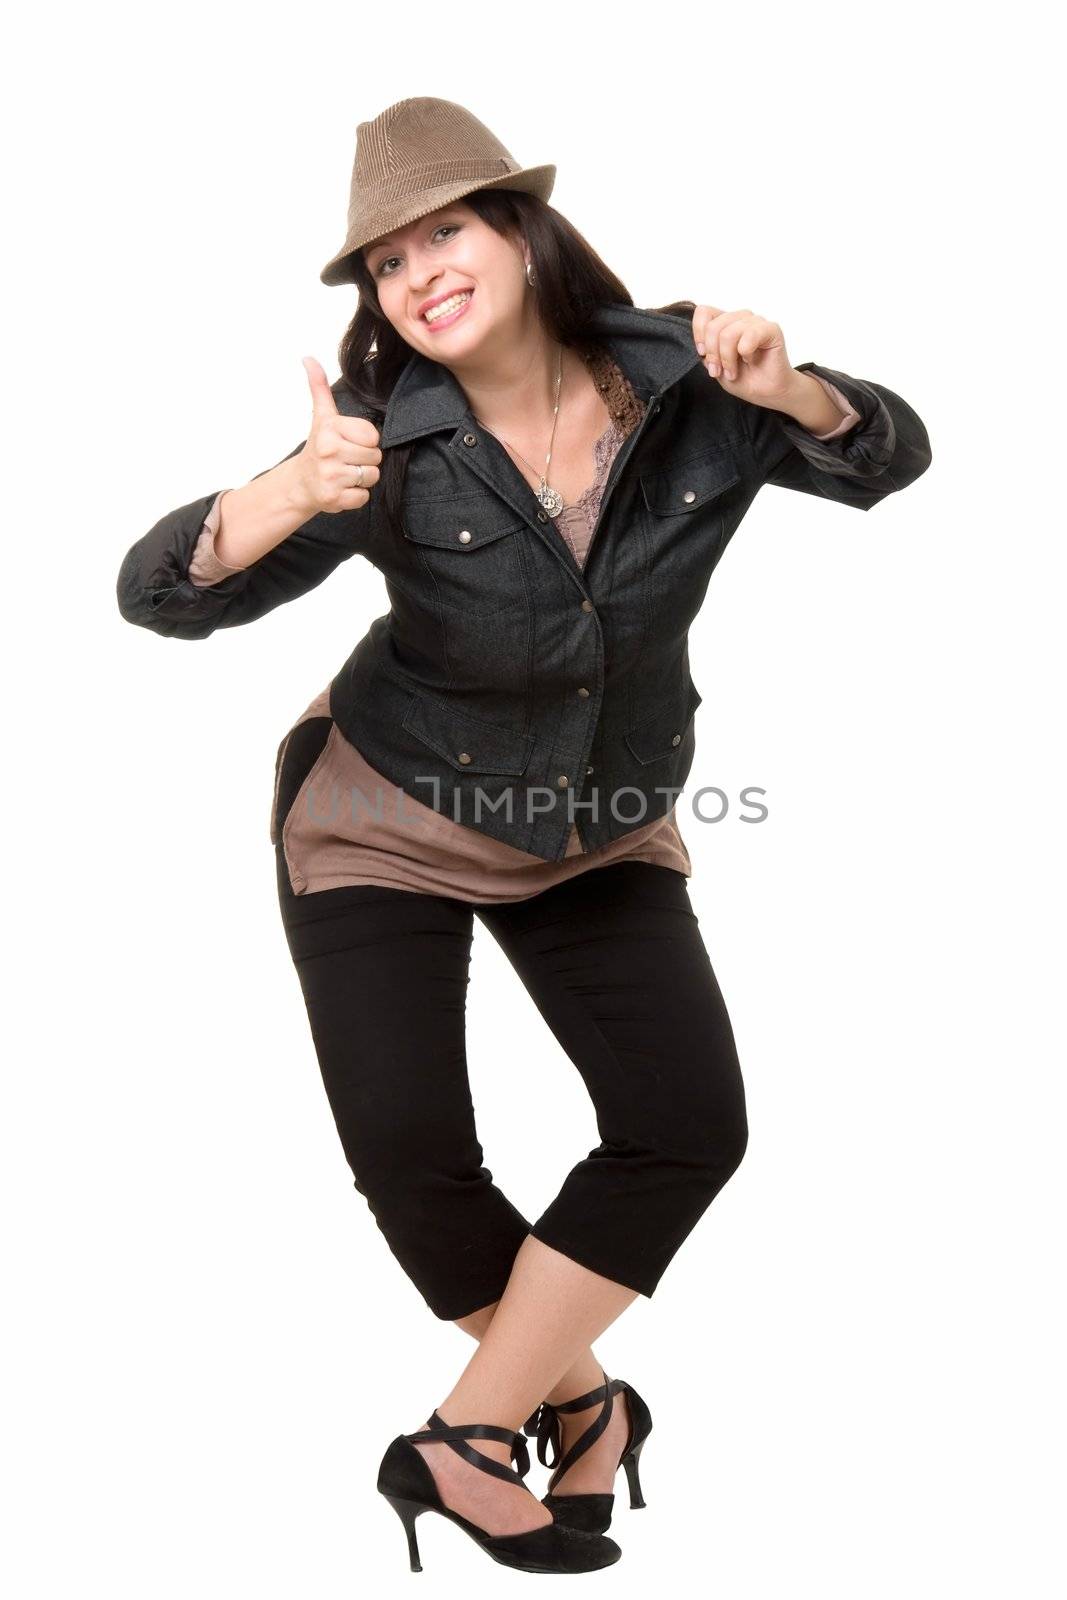 dancing beautiful woman on a white background